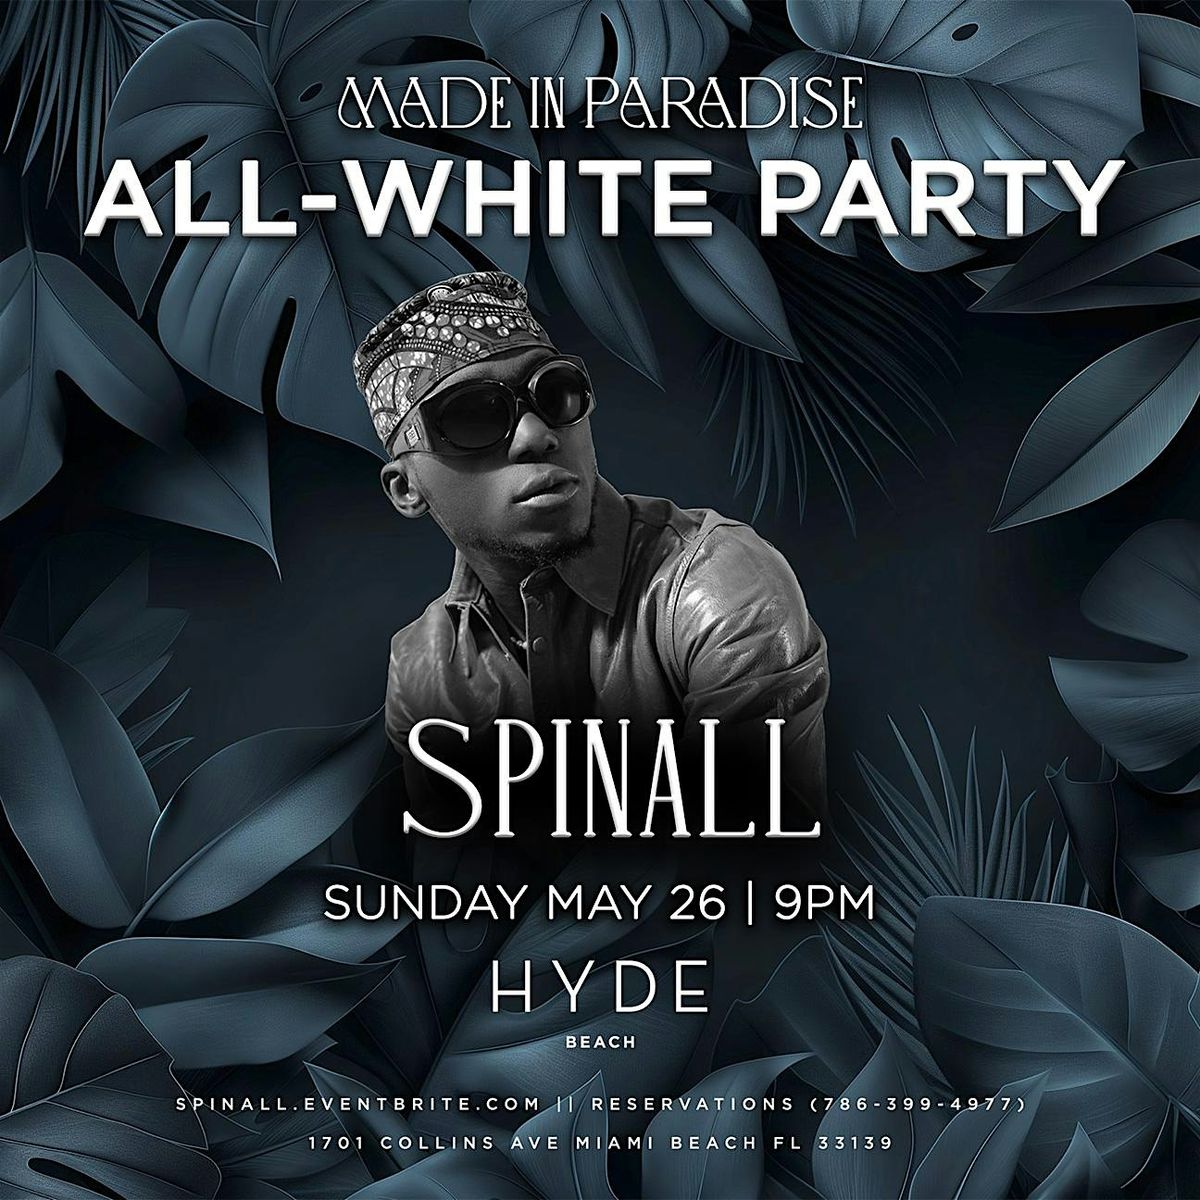 MADE IN PARADISE: SPINALL